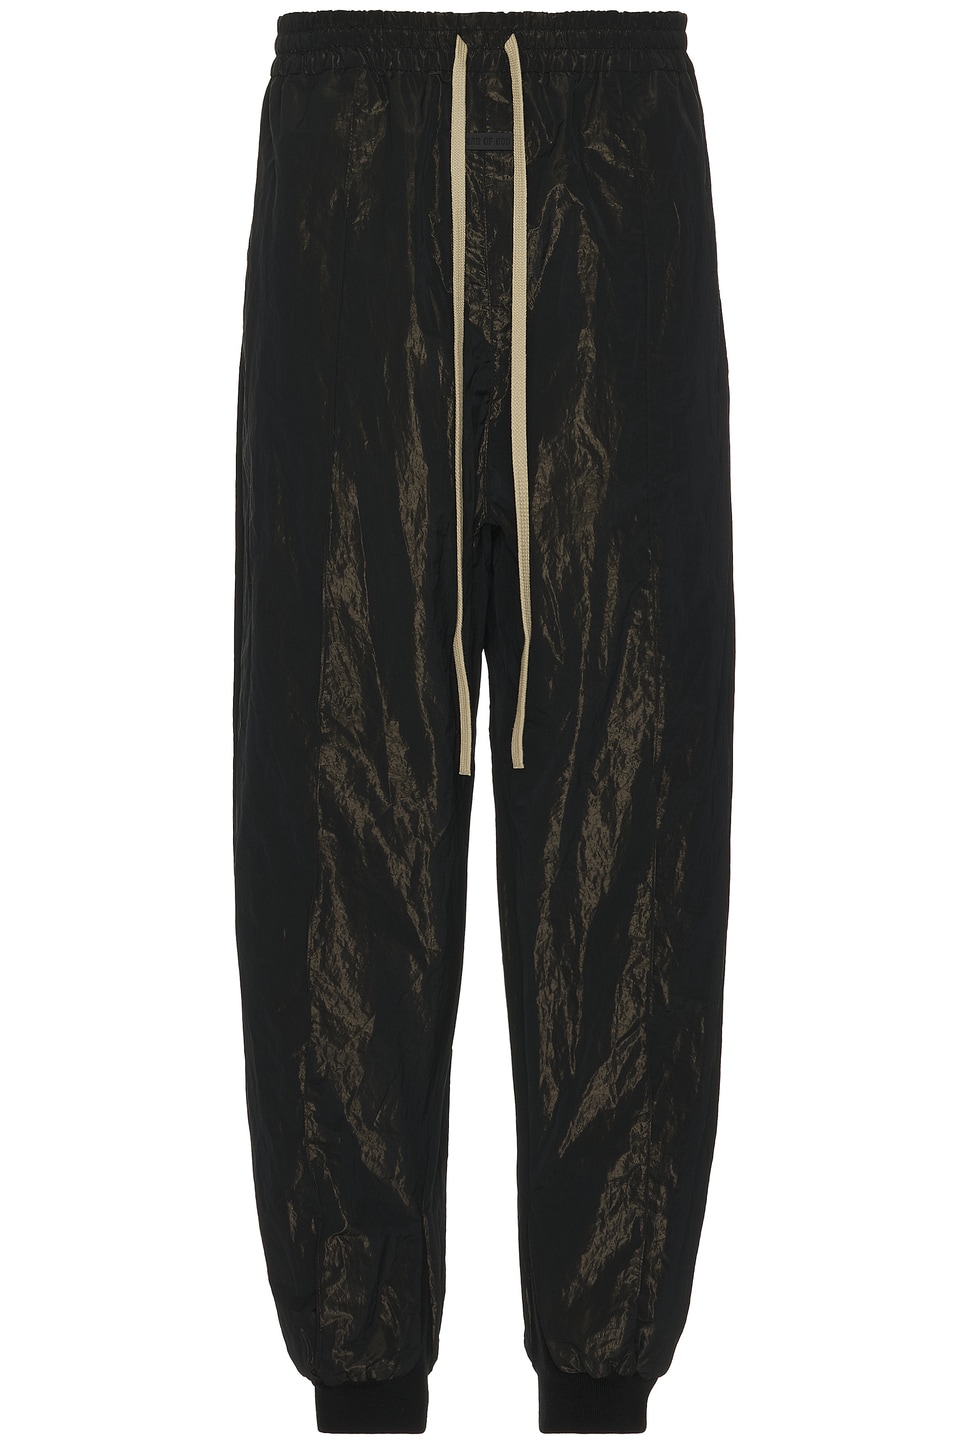 Image 1 of Fear of God Wrinkled Polyester Pintuck Sweatpant in Black